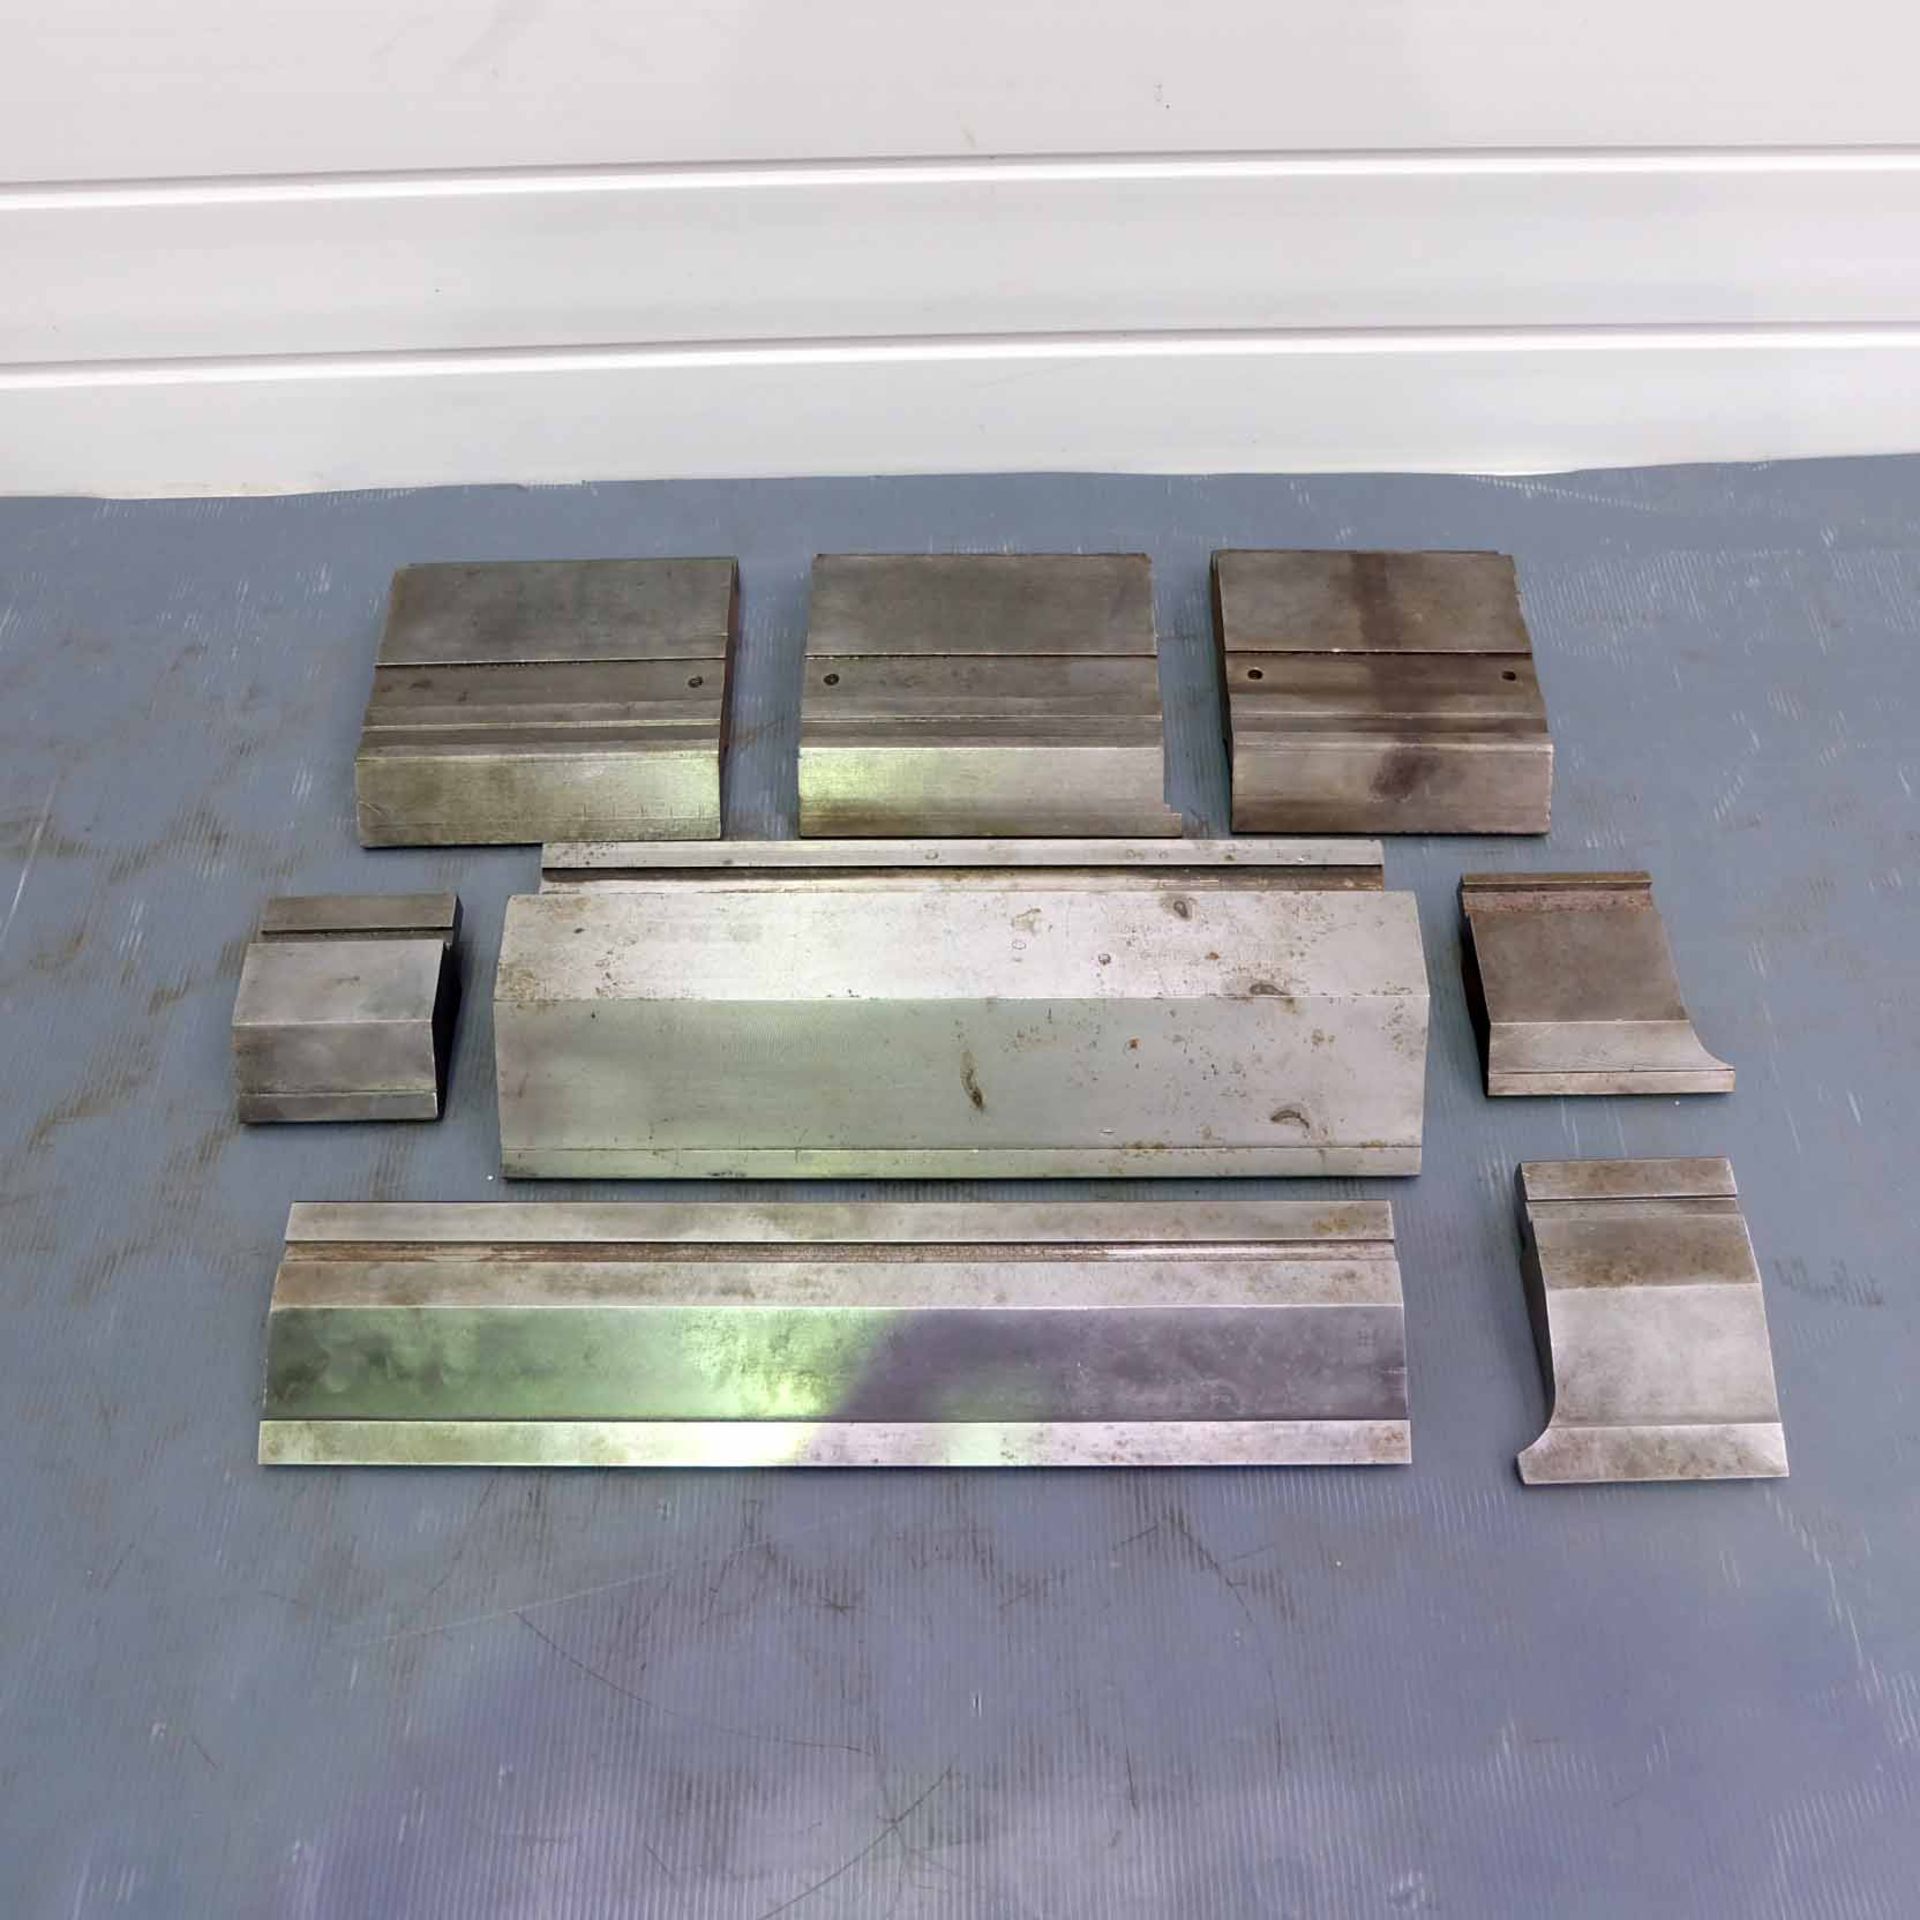 Selection of Miscalaneous Press Brake Top Tooling. Various Sizes & Types. 80mm-400mm Long.